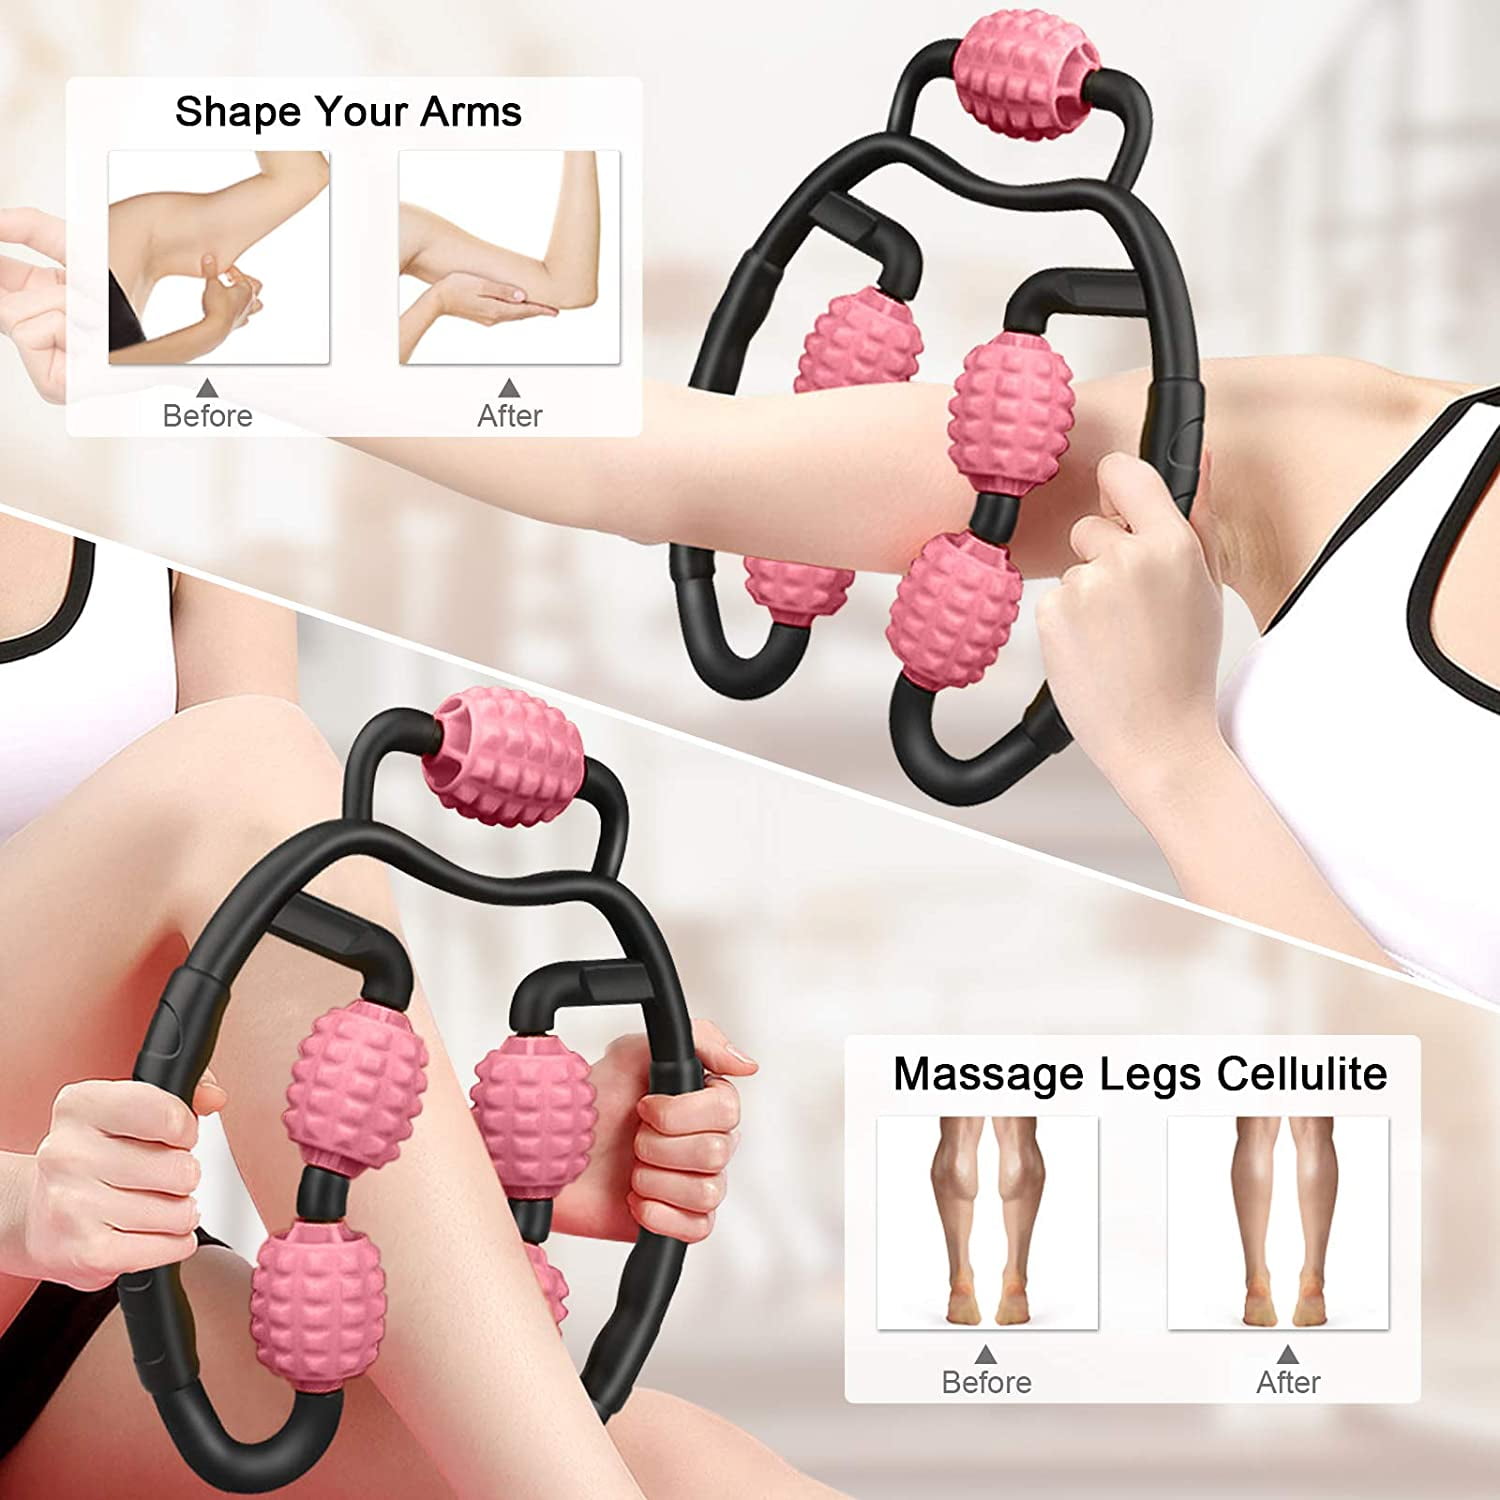 Arm Myofascial Muscle Relieve After Workout Exercise Self Massager Deep Tissue Fascia Pain Relieve Neck CORATED Foam Roller Massager Tools for Leg Elbow 